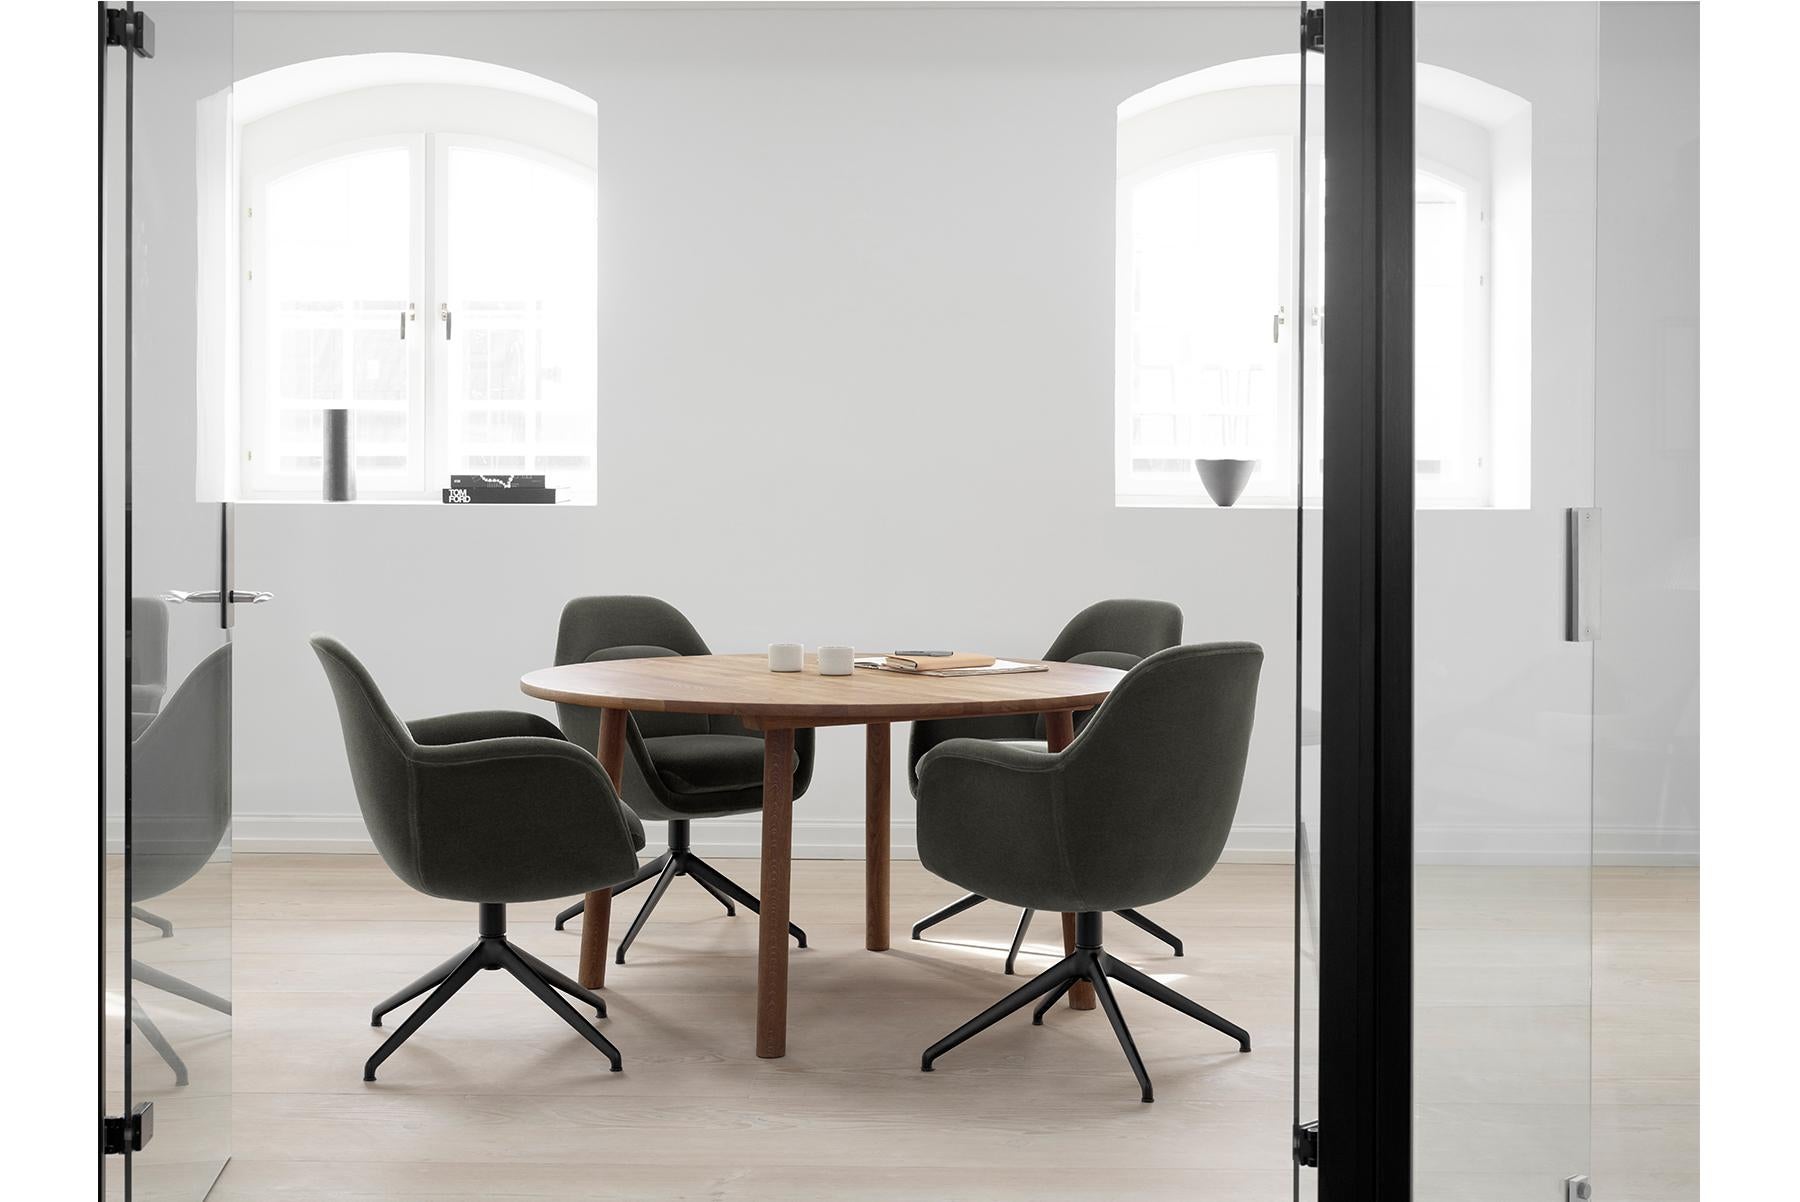 Jasper Morrison taro dining table, round
Taro is a series of solid oak tables created with a strong focus on daily function and use, whether in the kitchen, dining area or meeting room. With machined grooves along its length, the table top